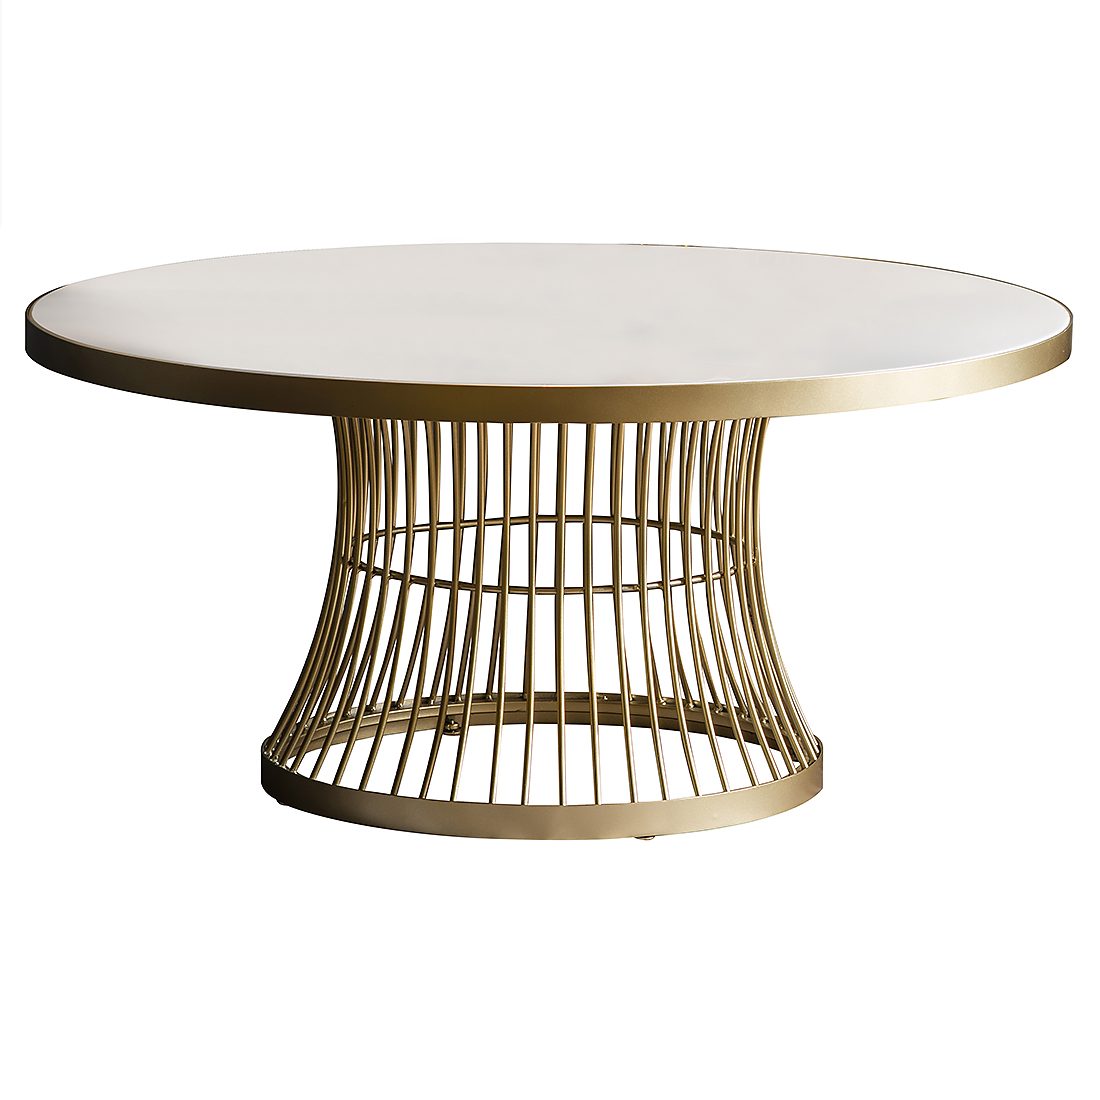 White And Gold Round Coffee Table - Erin coffee table in design terms ...